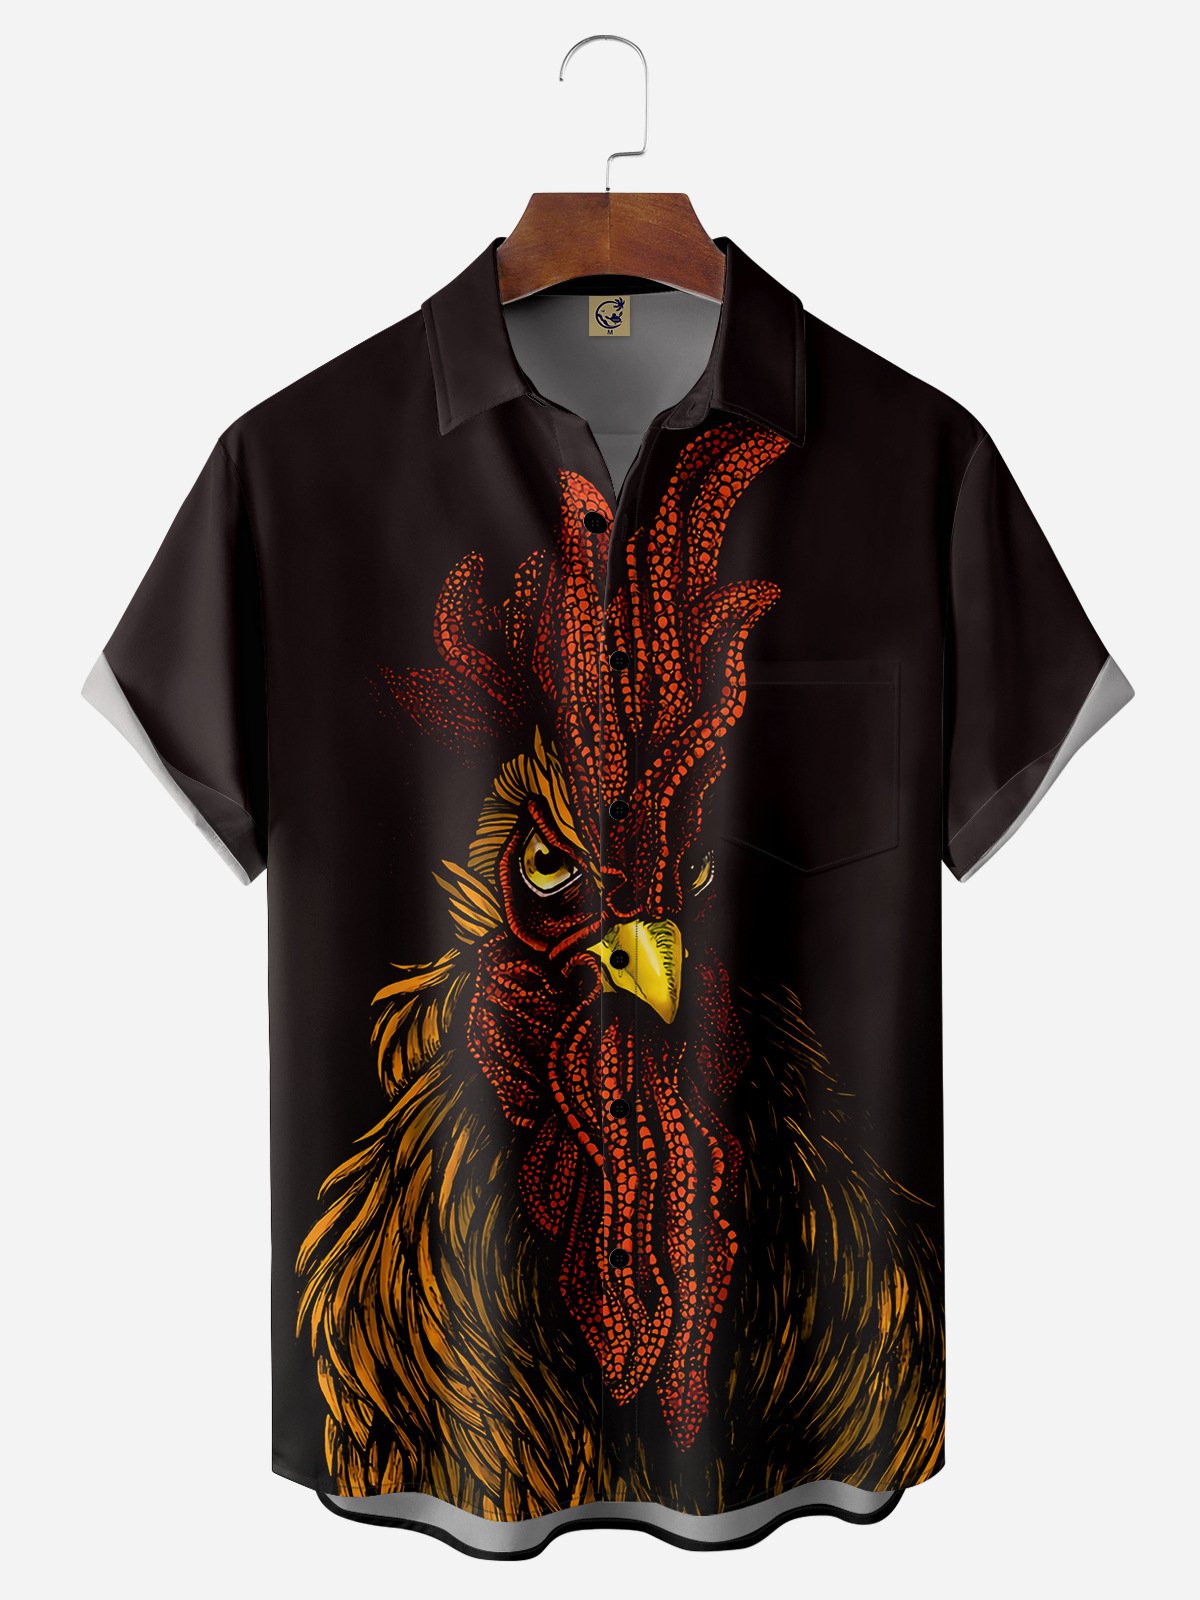 Hardaddy Art Rooster Chest Pocket Short Sleeve Casual Shirt